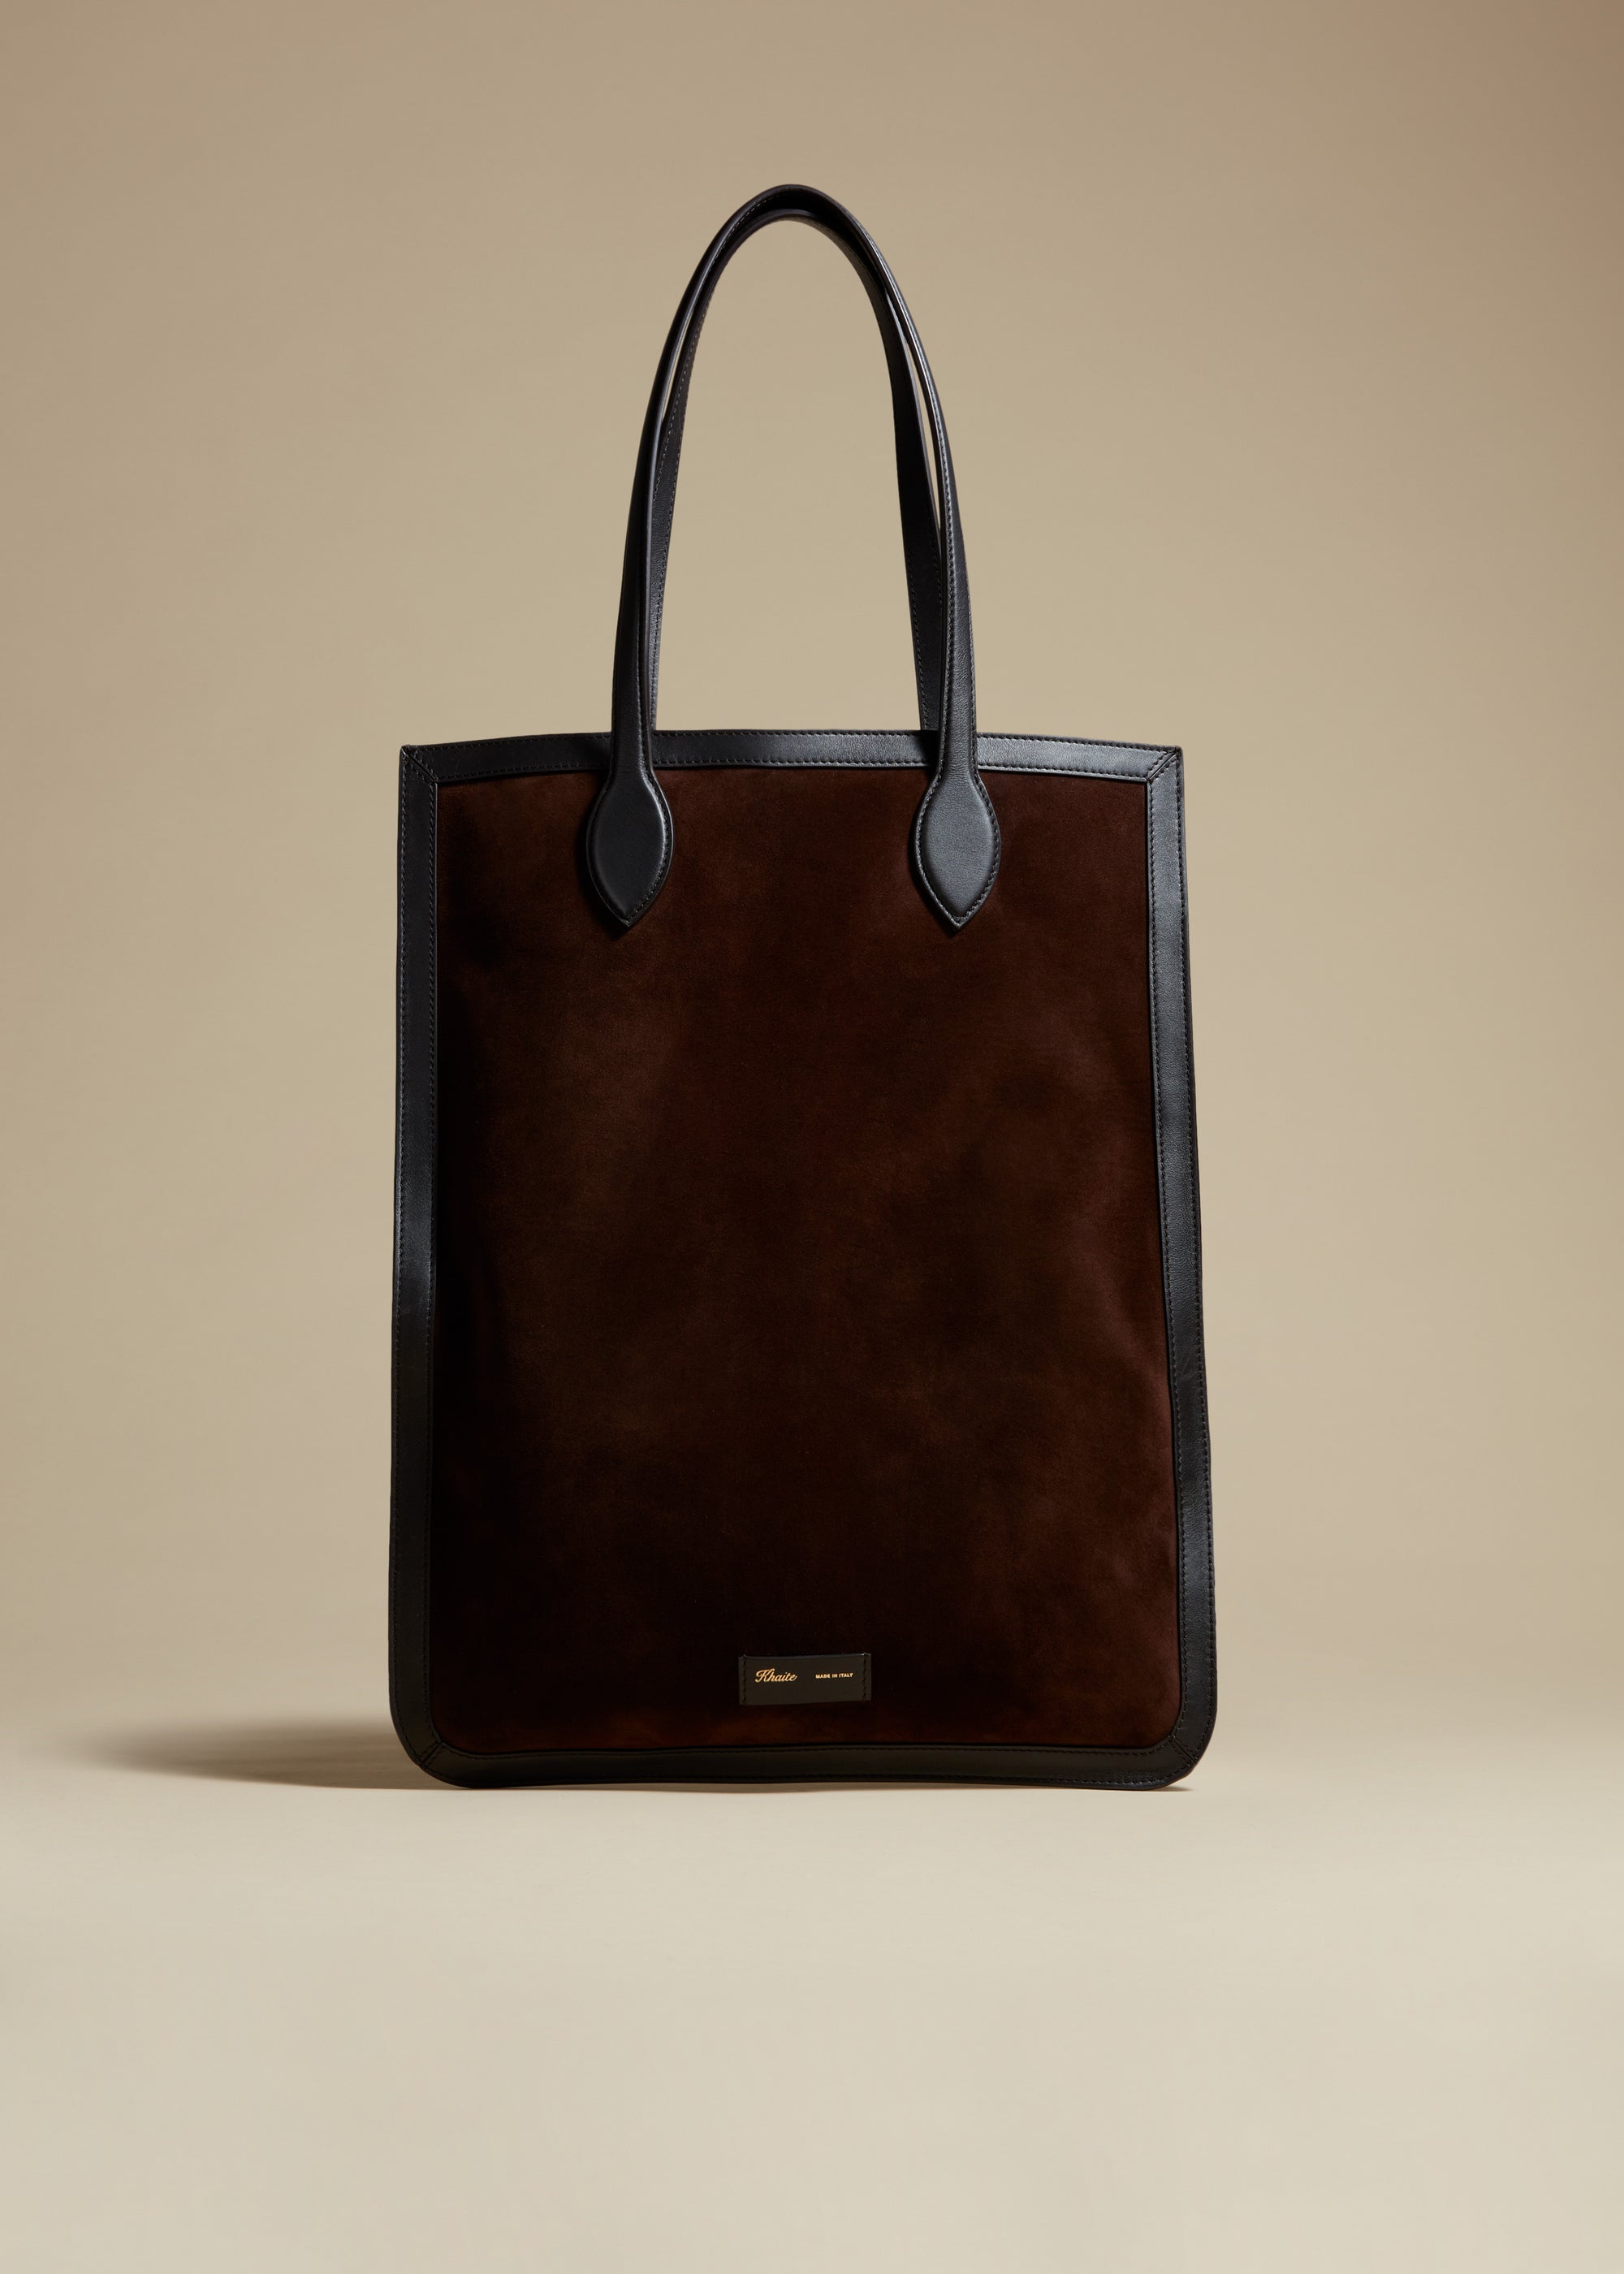 Grace tote in leather - Coffee